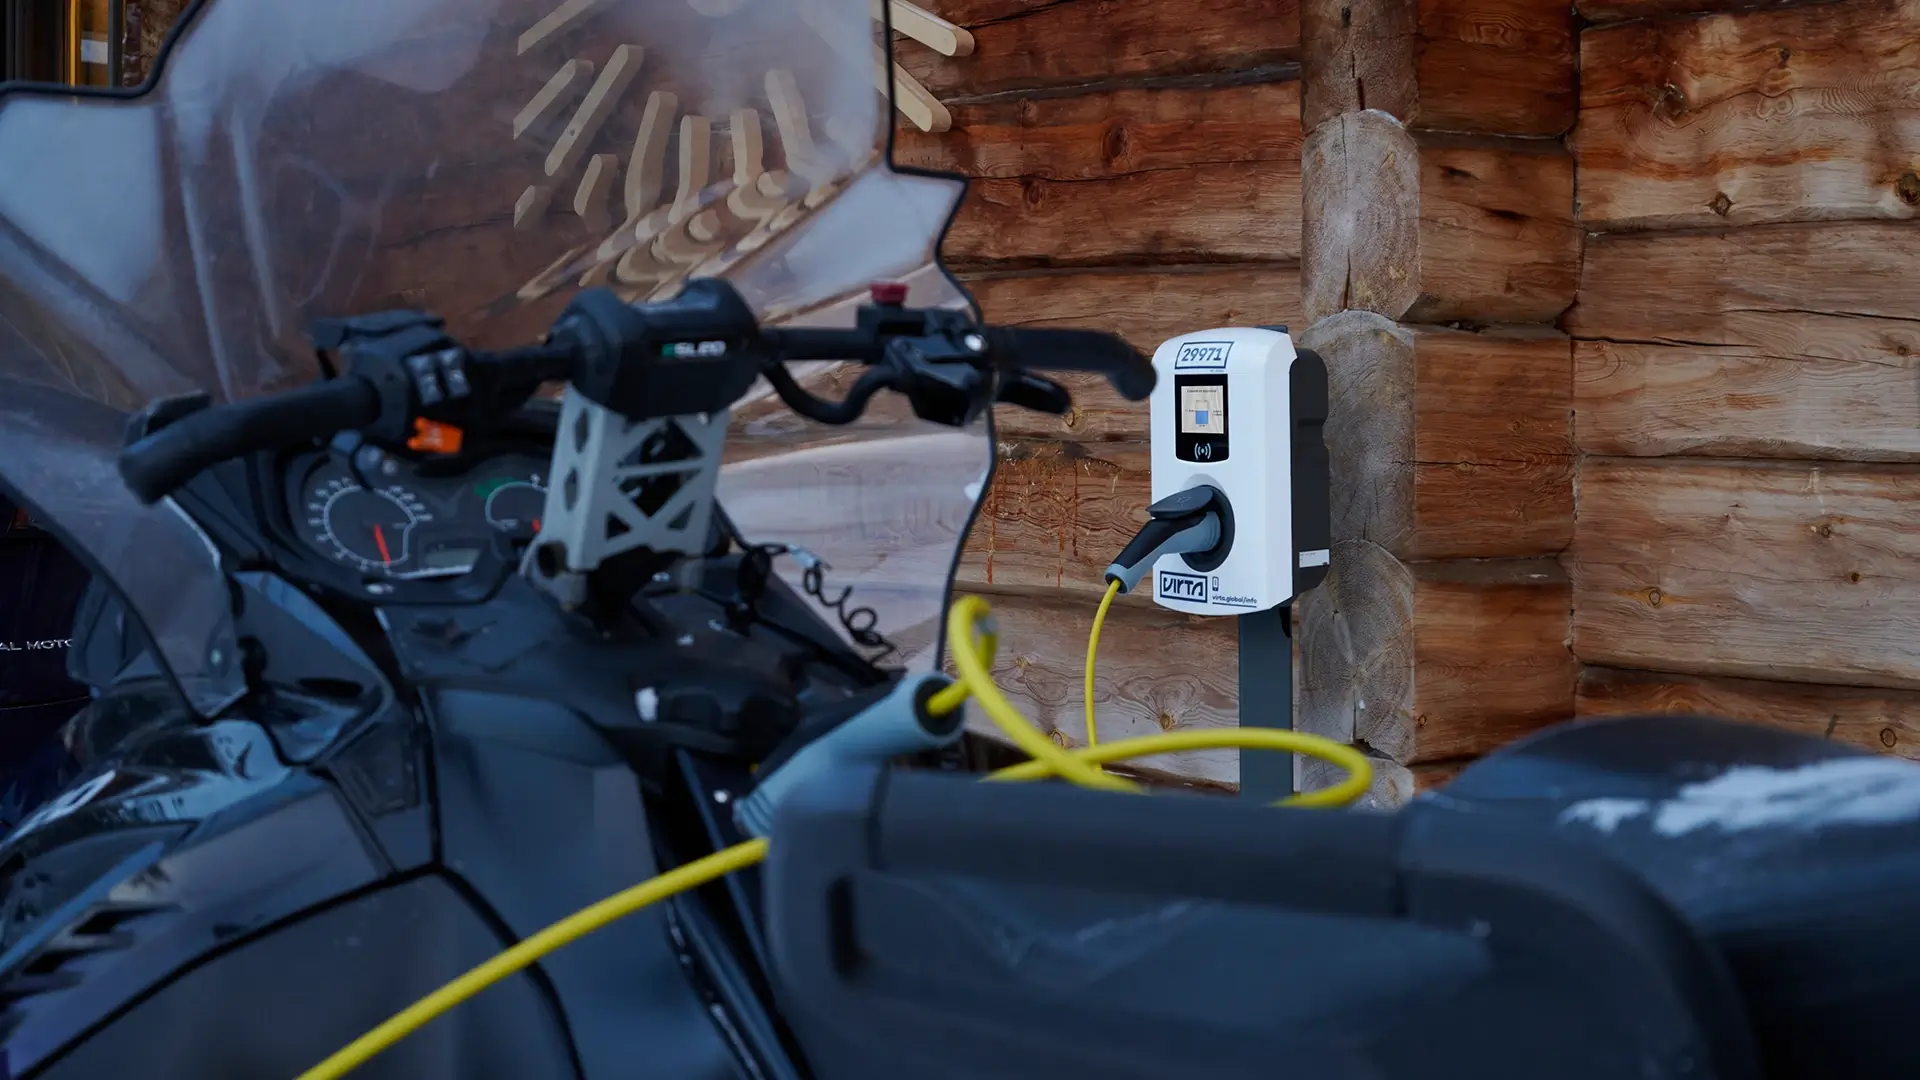 Electric snowmobile AC charging station outside cabin